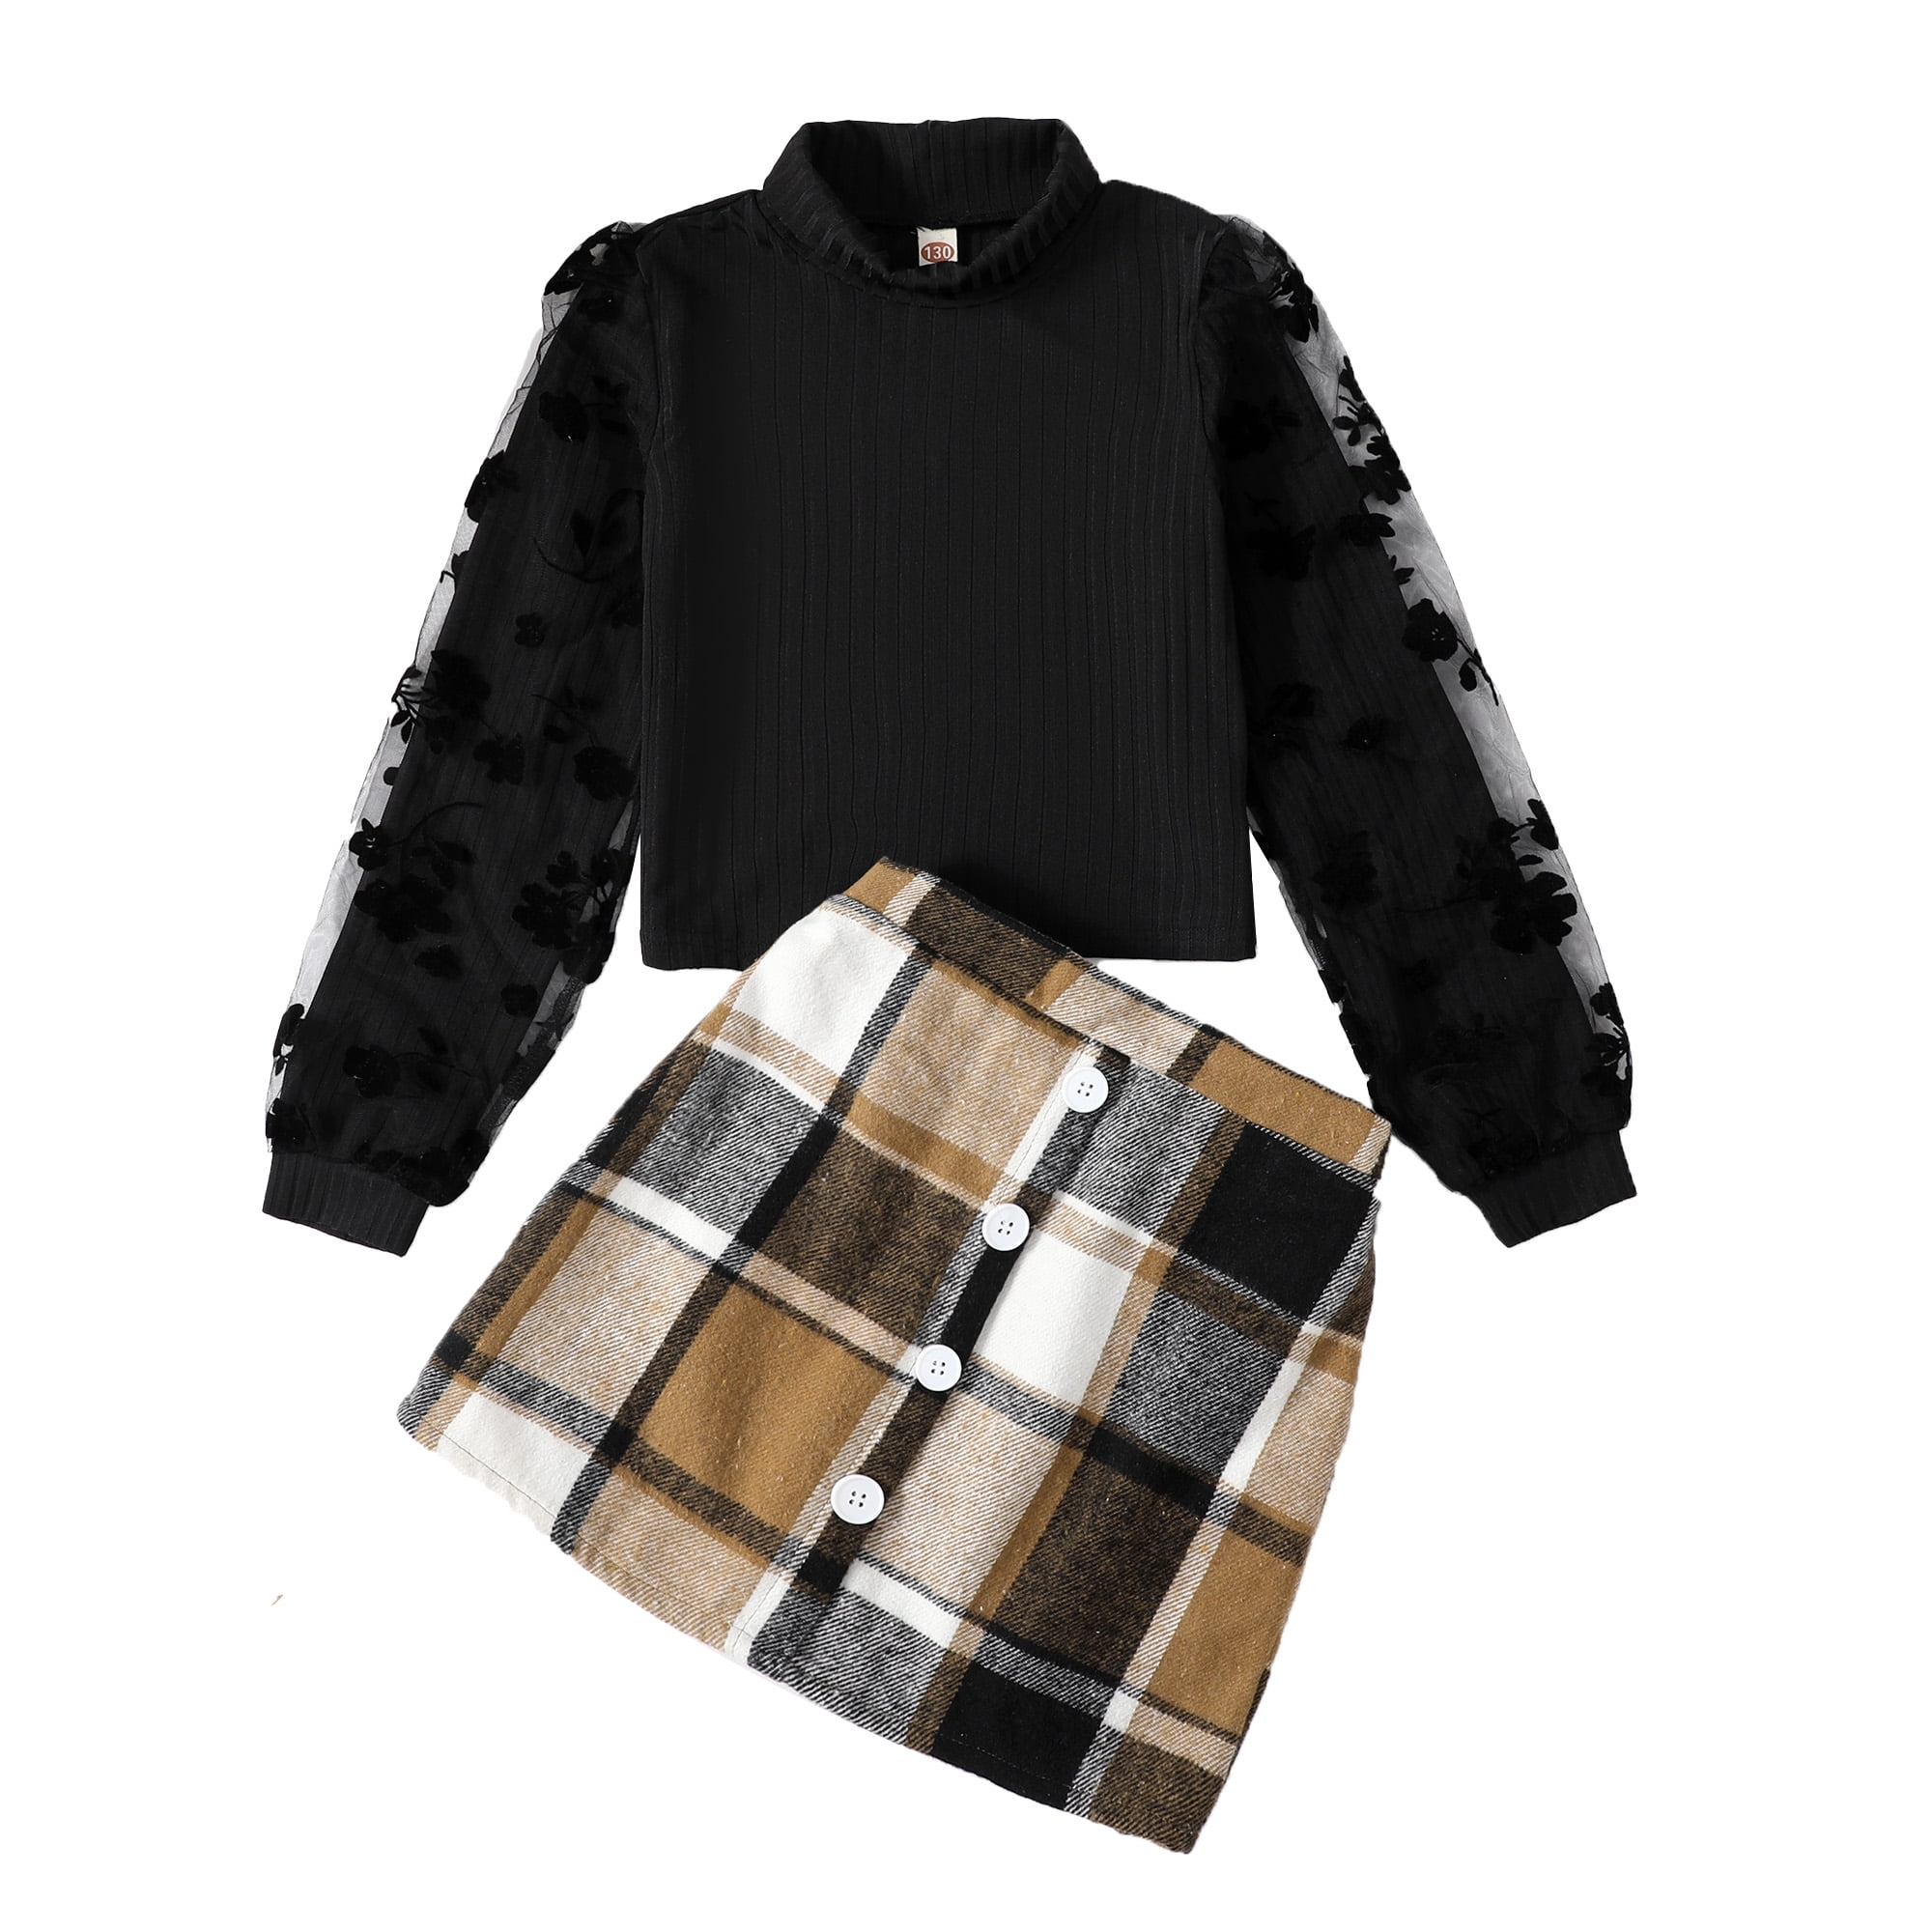 Share 94+ black skirt outfit casual latest